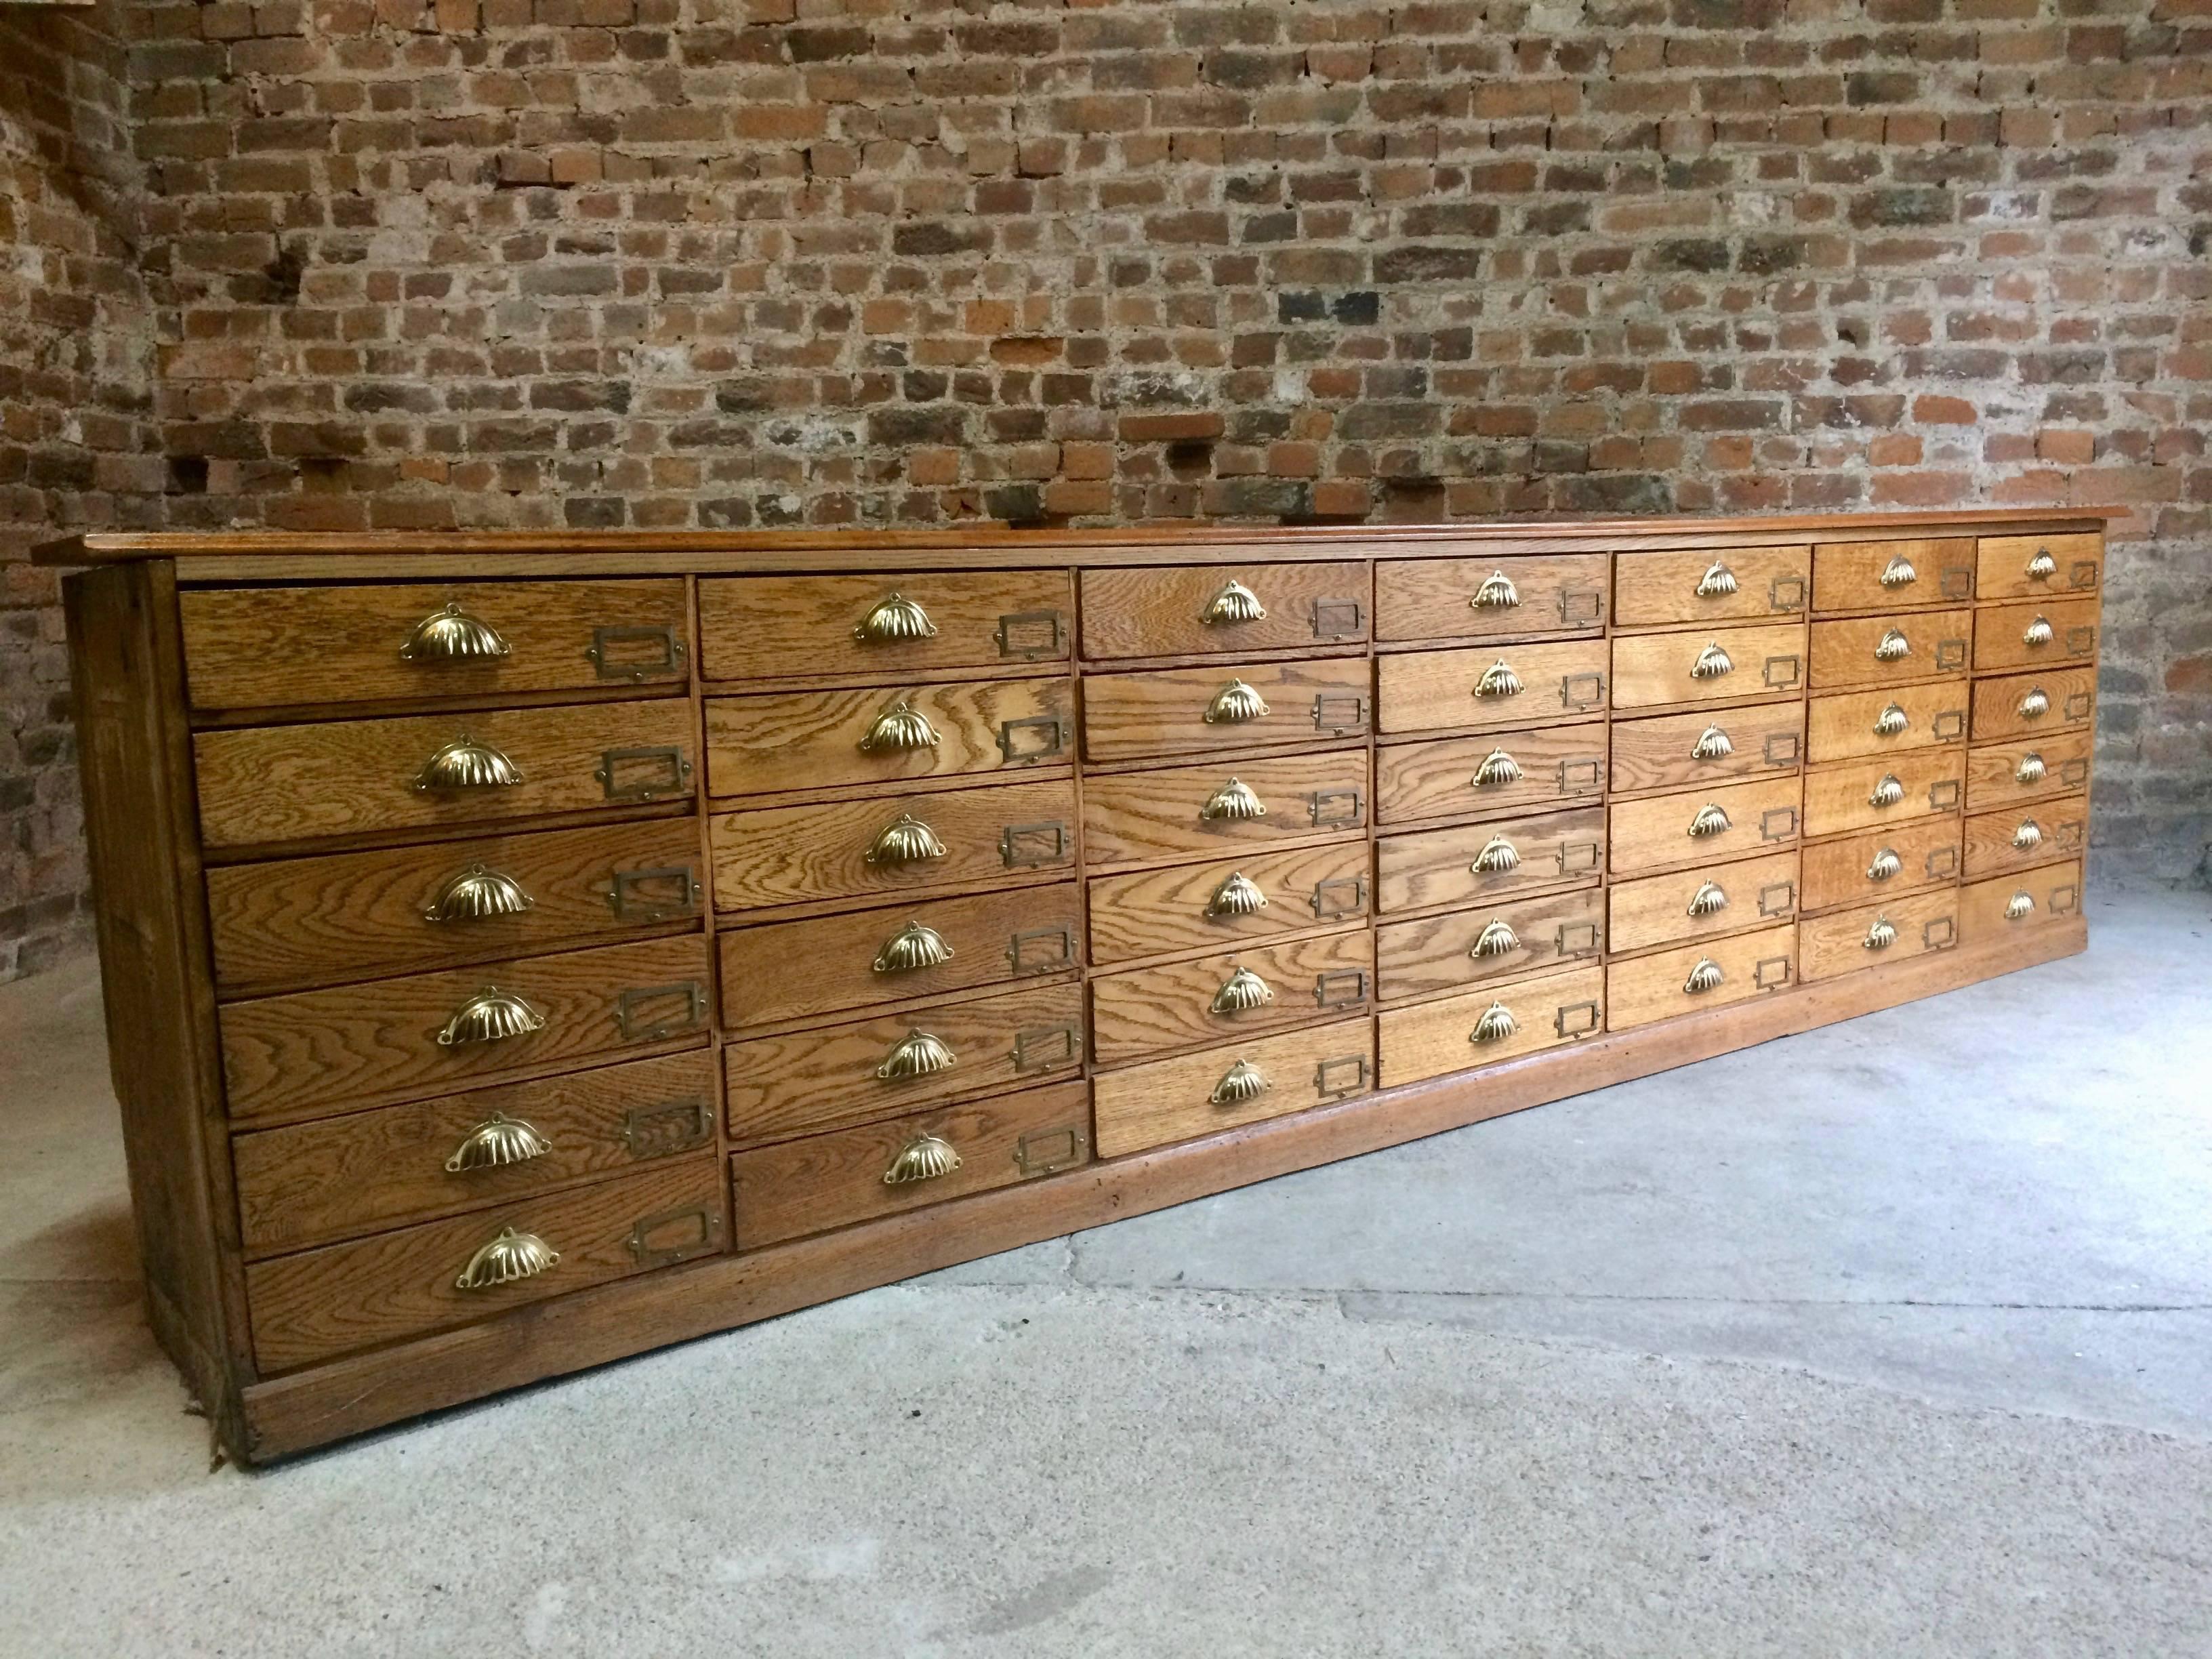 Late 19th Century Haberdashery Chest of Drawers Shop Counter Oak Antique Loft Industrial Style